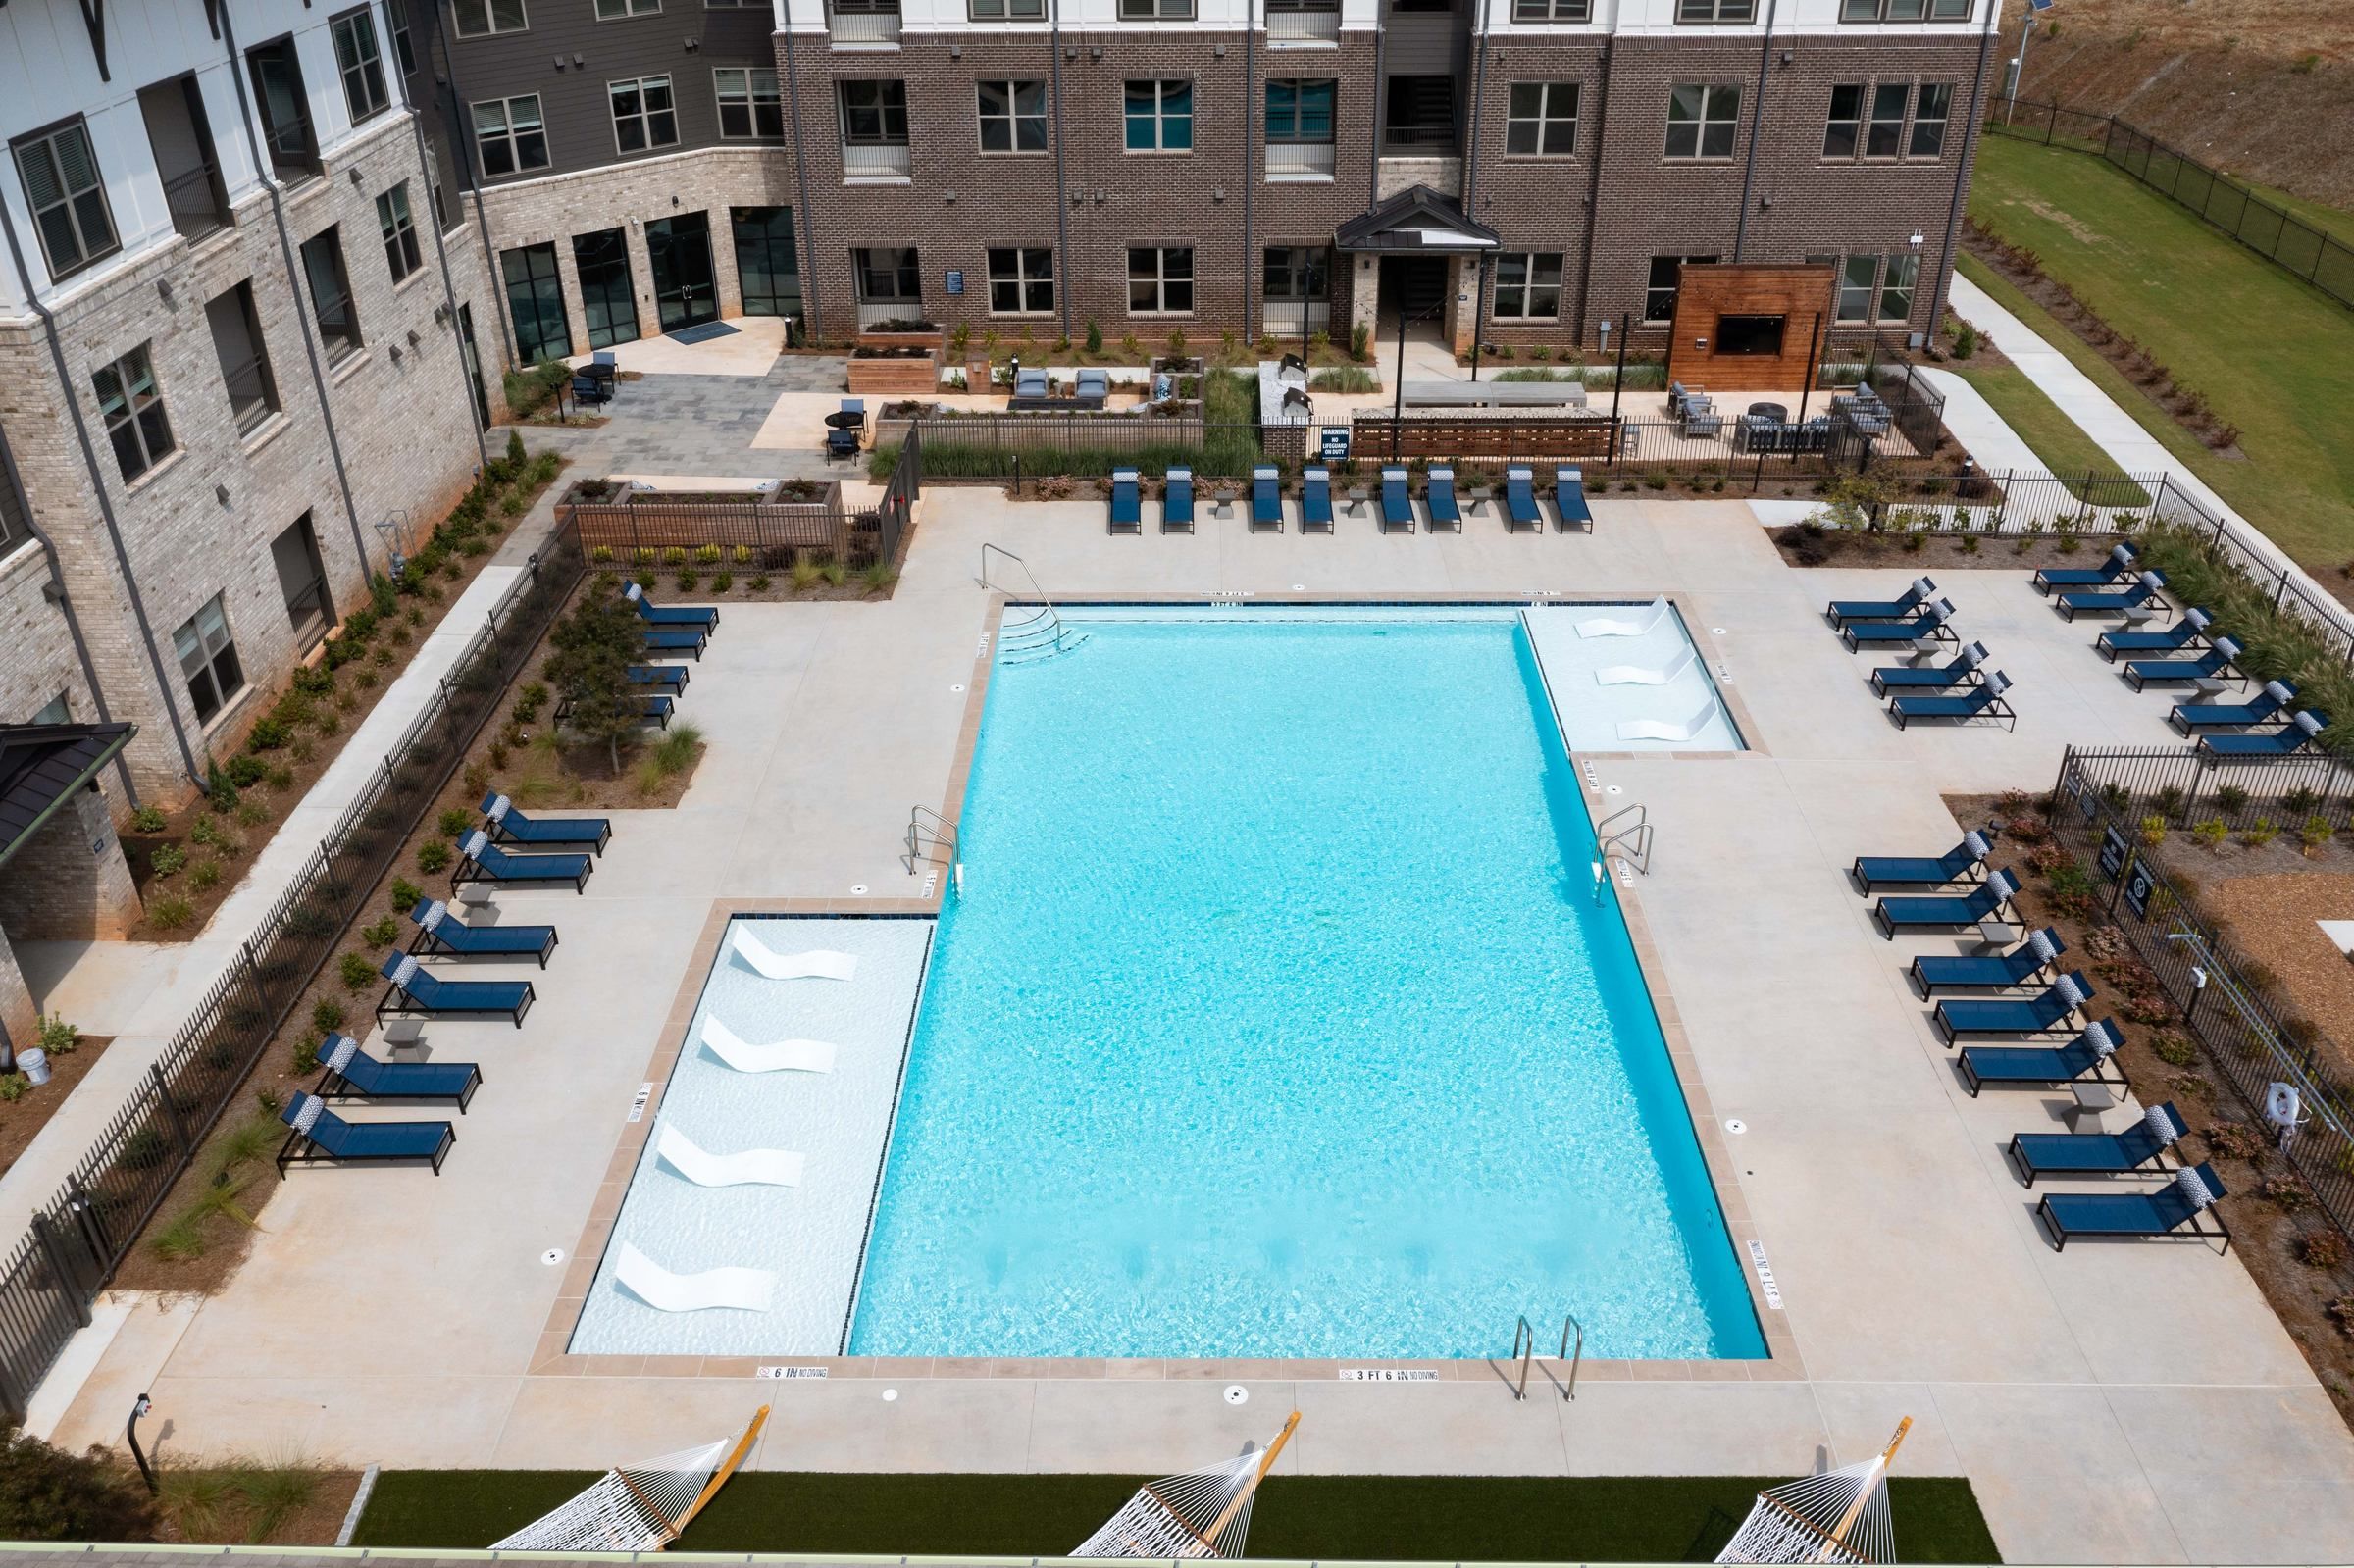 The outdoor pool of Alta Ashley Park as seen from above, featuring sparkling turquoise waters, white in-pool loungers, and neatly lined up sunbeds along the sides.